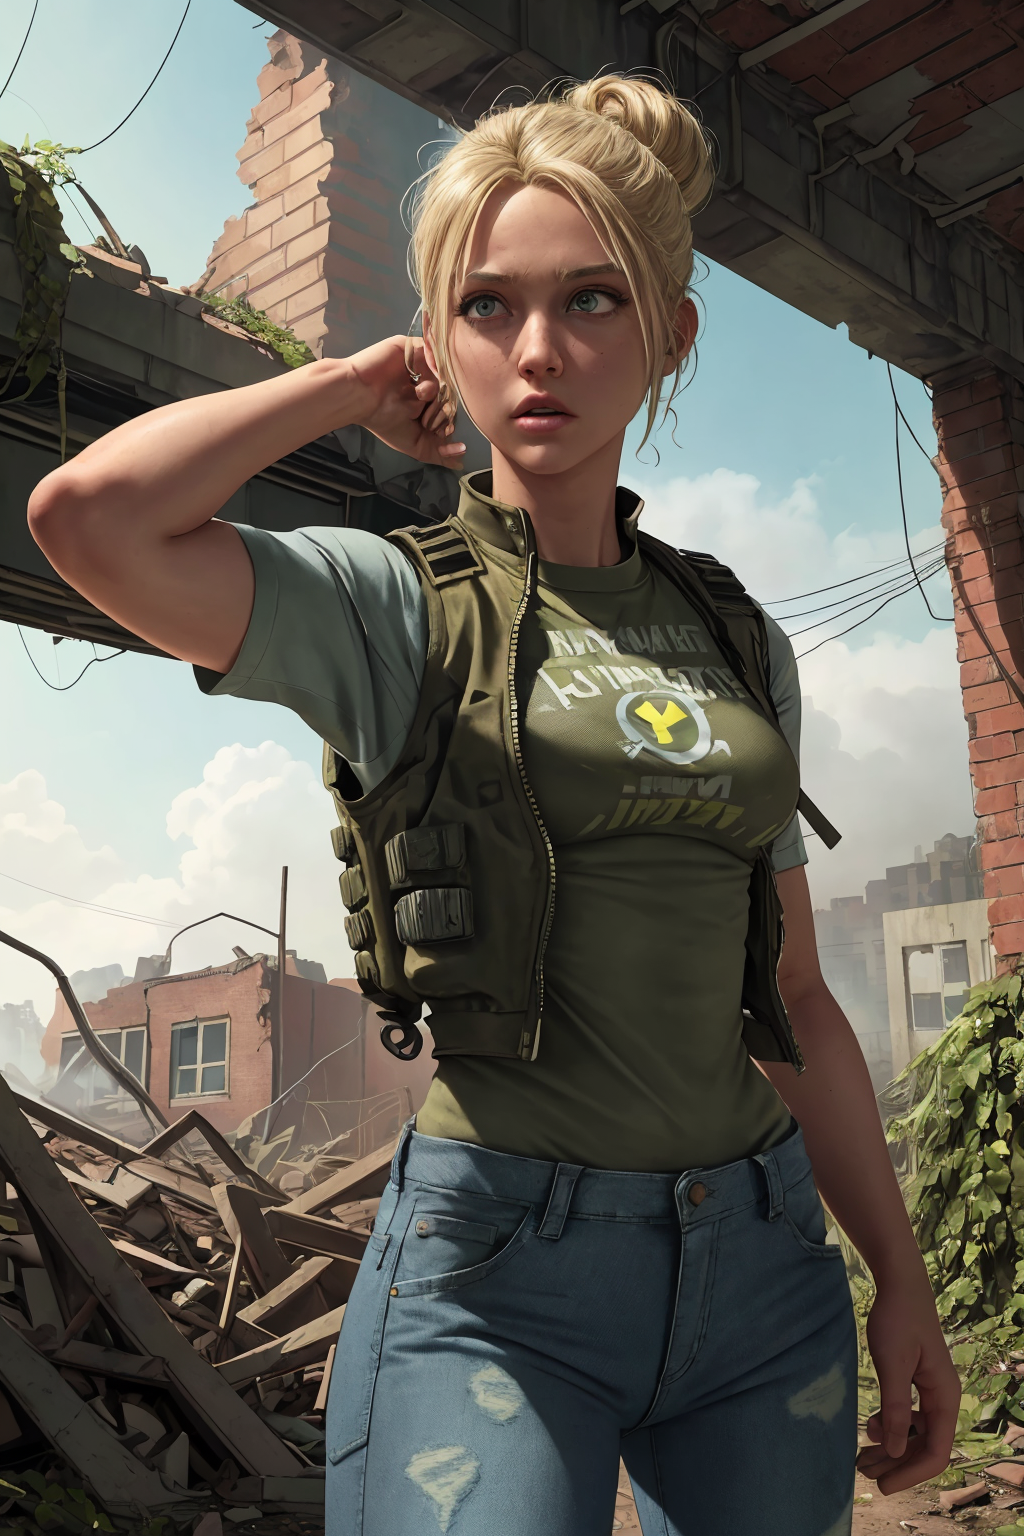 zrpgstyle, post-apocalypse fallout 4 RPG character blonde hair upsweep updo wearing black (military tactical vest pants ts...